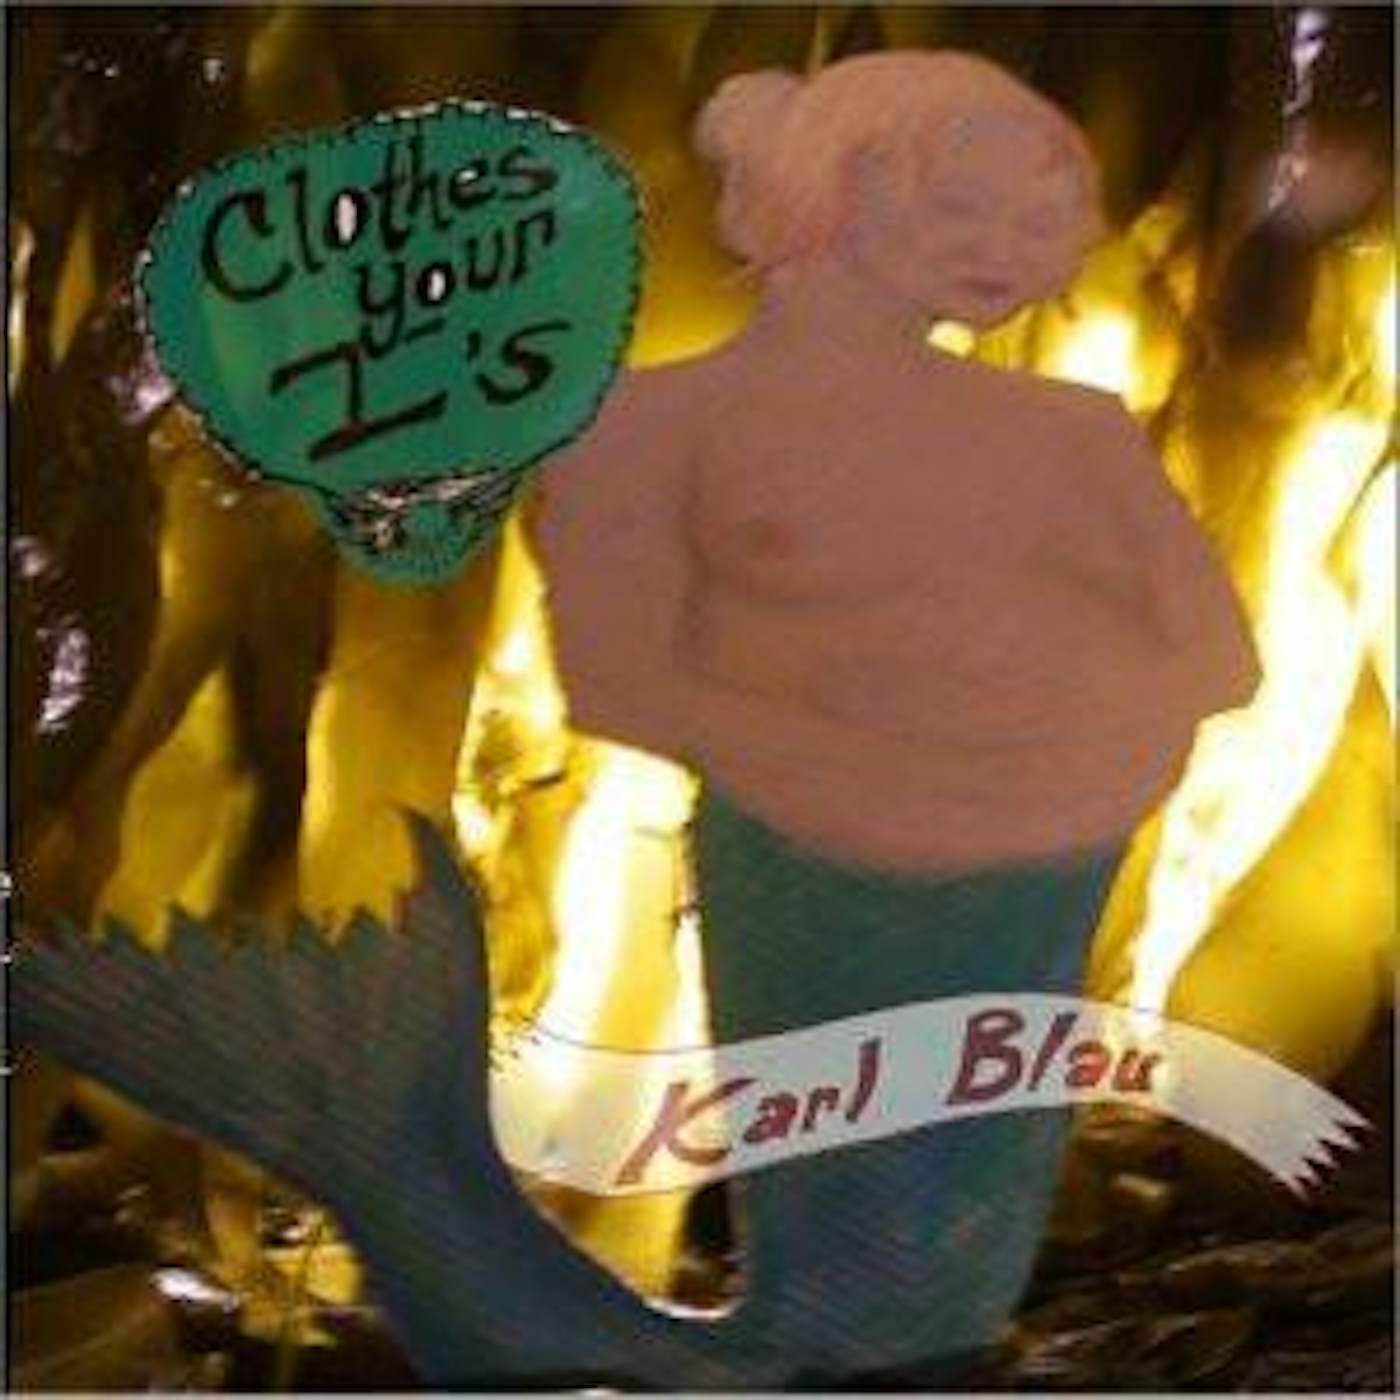 Karl Blau CLOTHES YOUR I'S CD